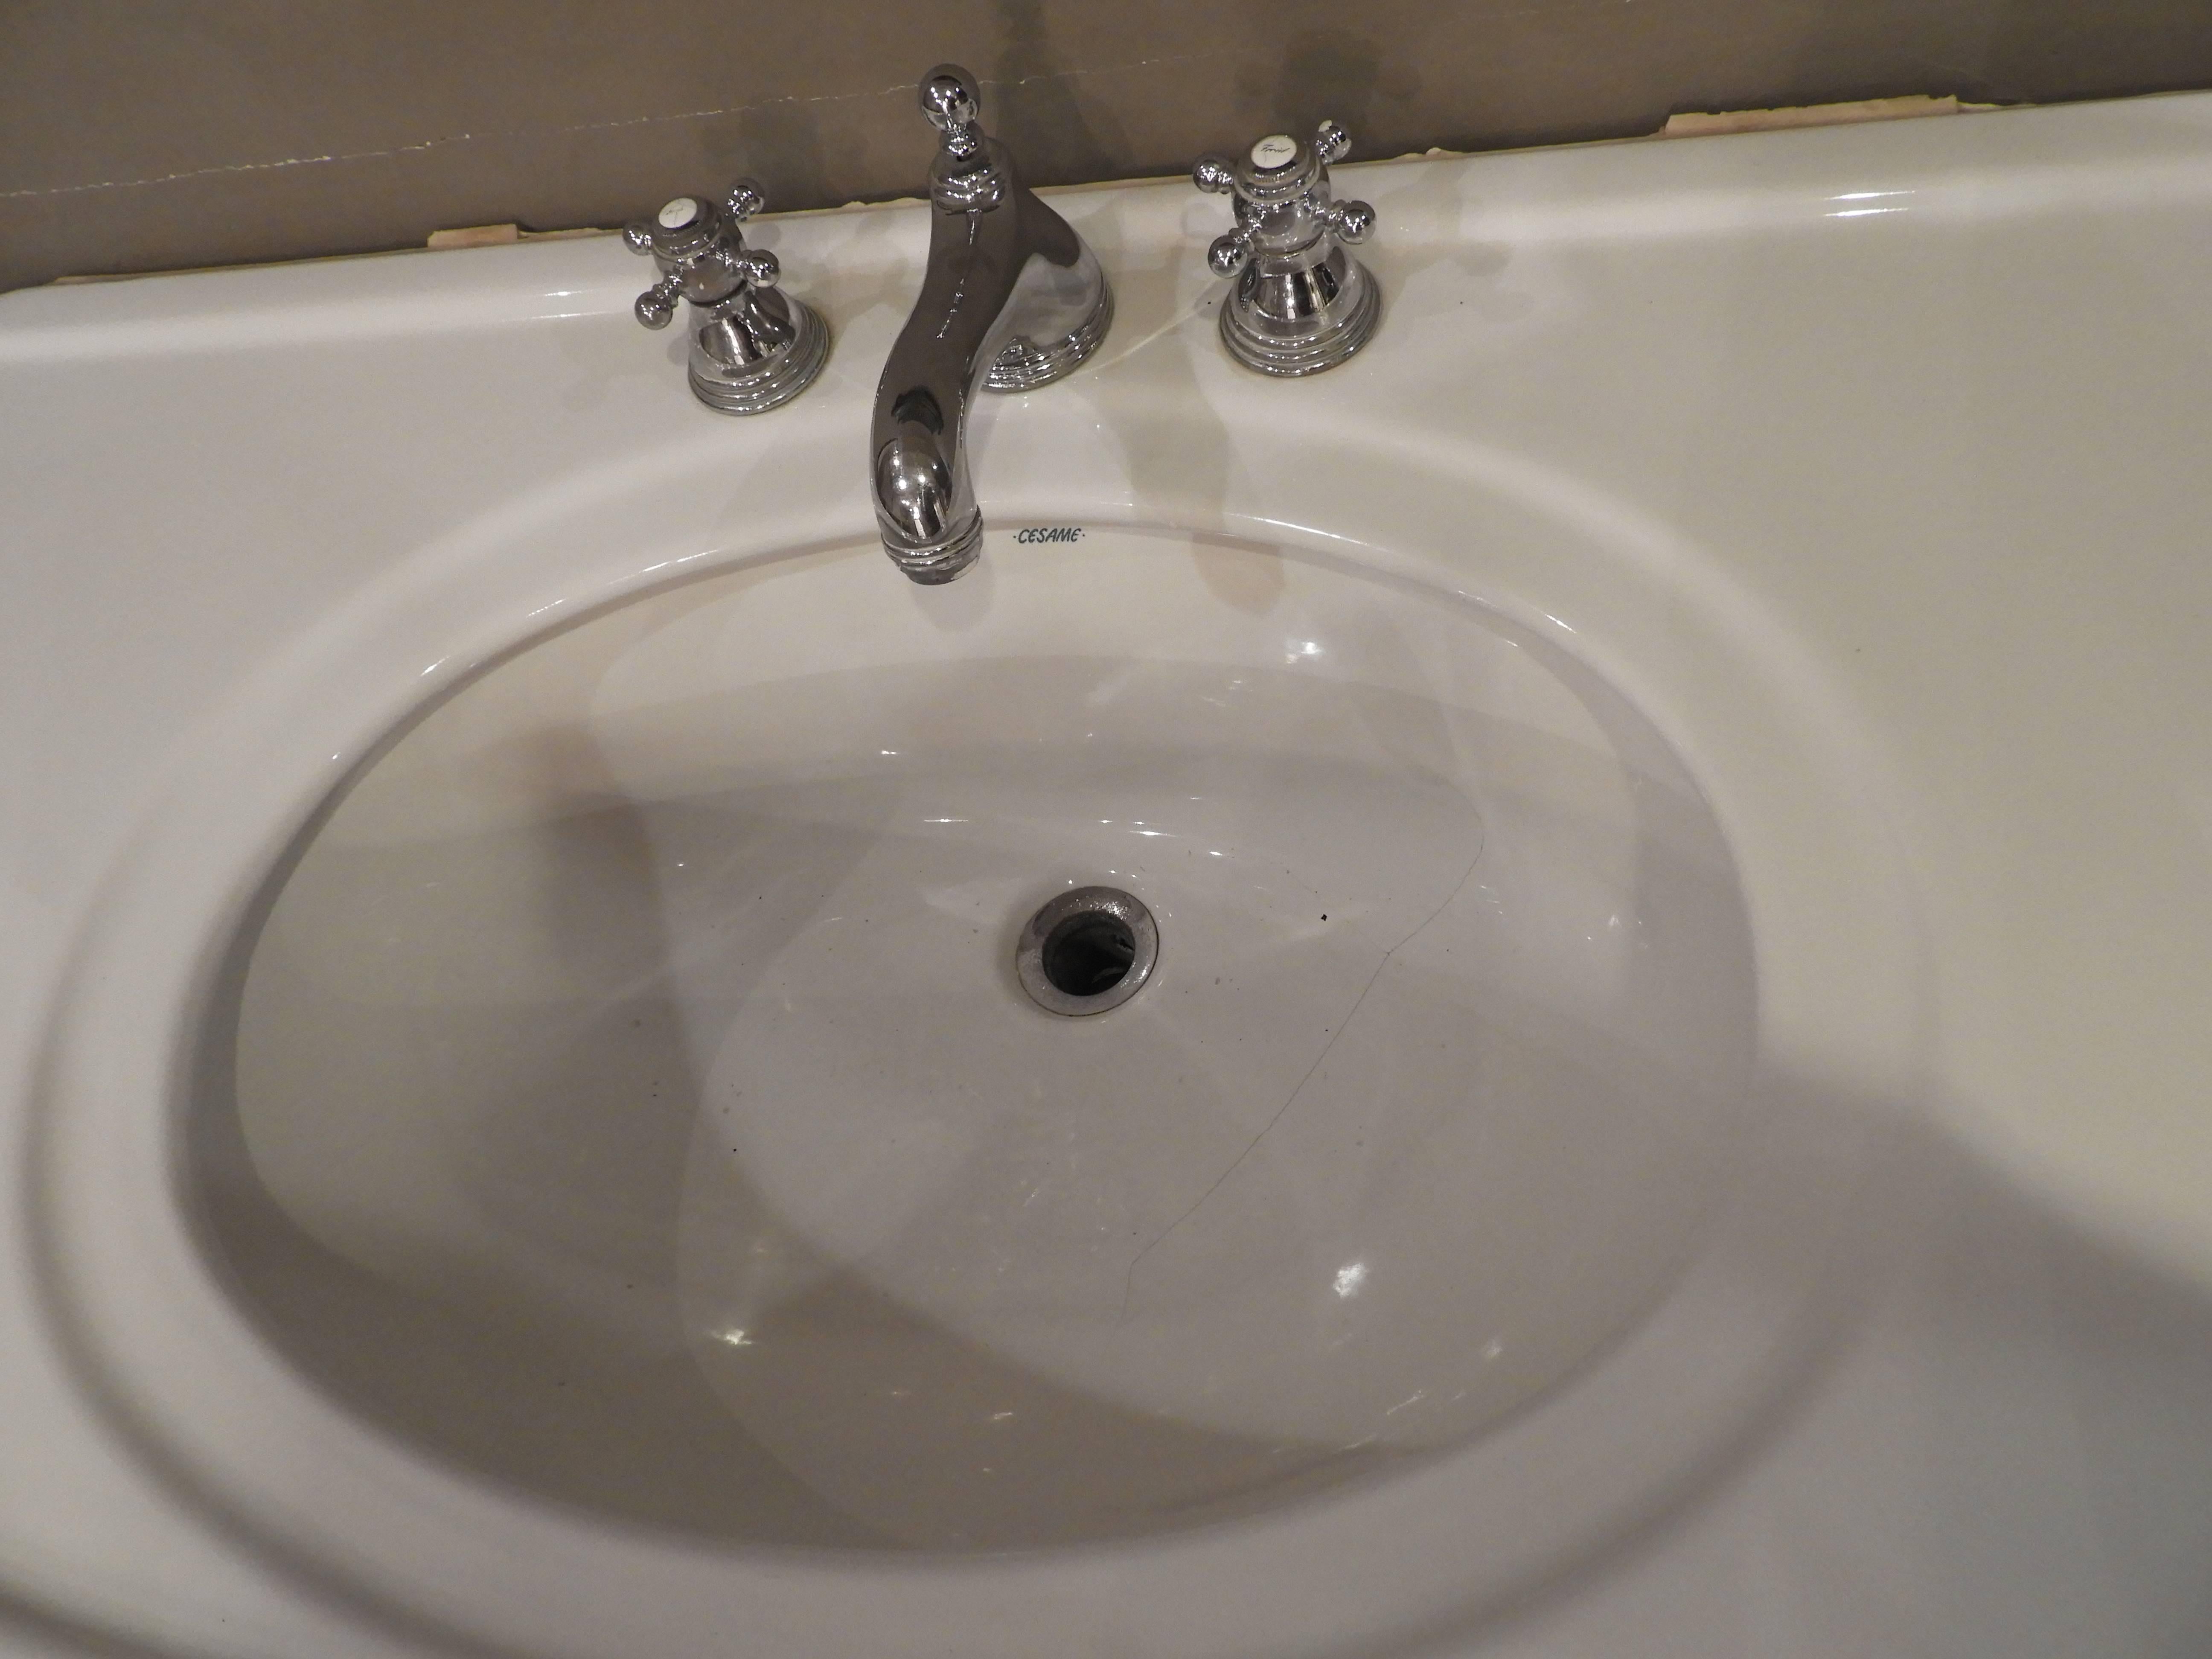 Other 20th Century Porcelain Sink